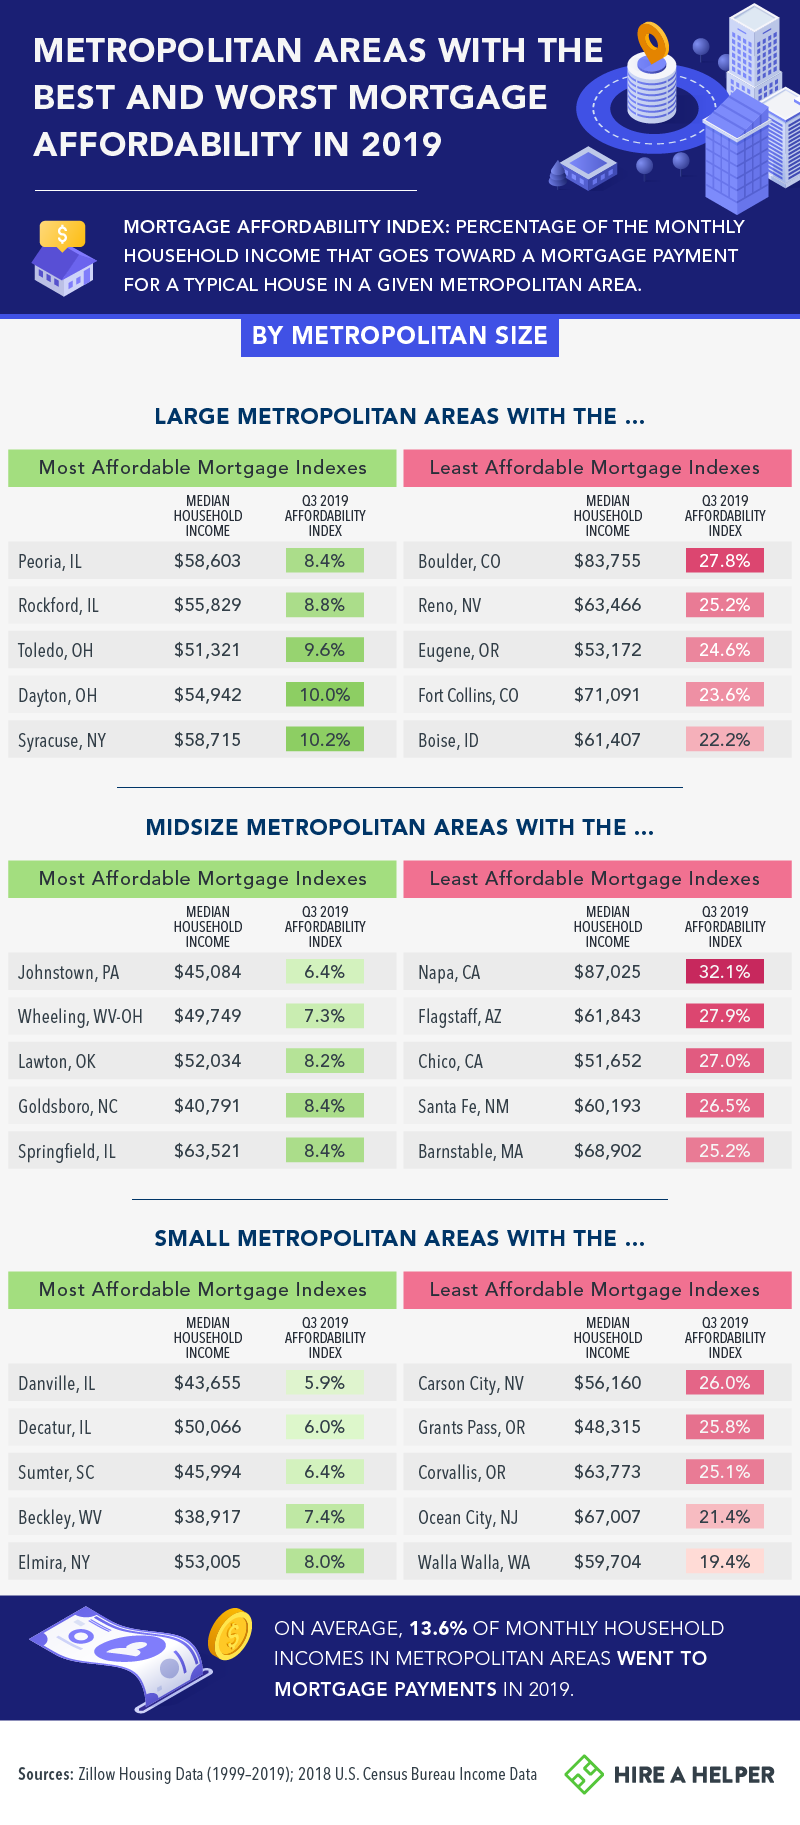 Metropolitan Areas with the best and worst mortgage affordability in 2019